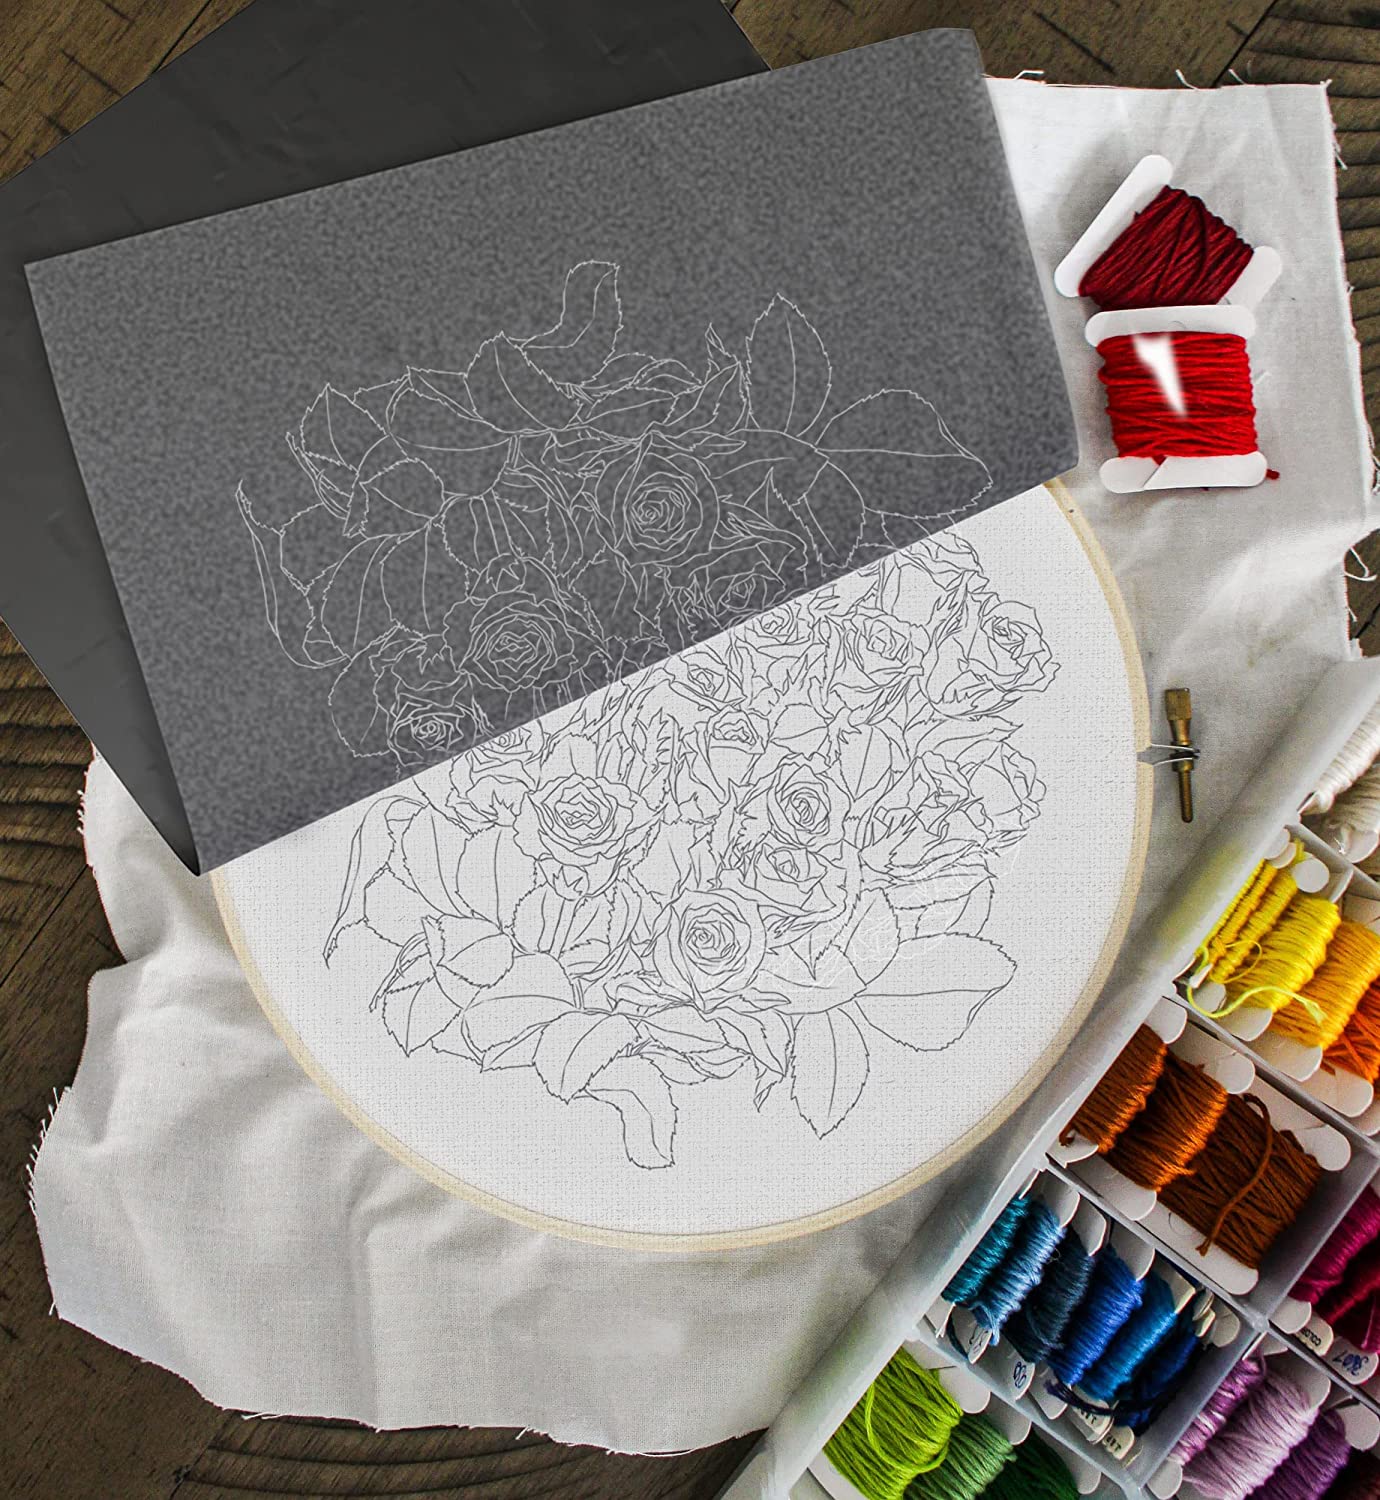 graphite paper for colorful threads and a embroidery hoop